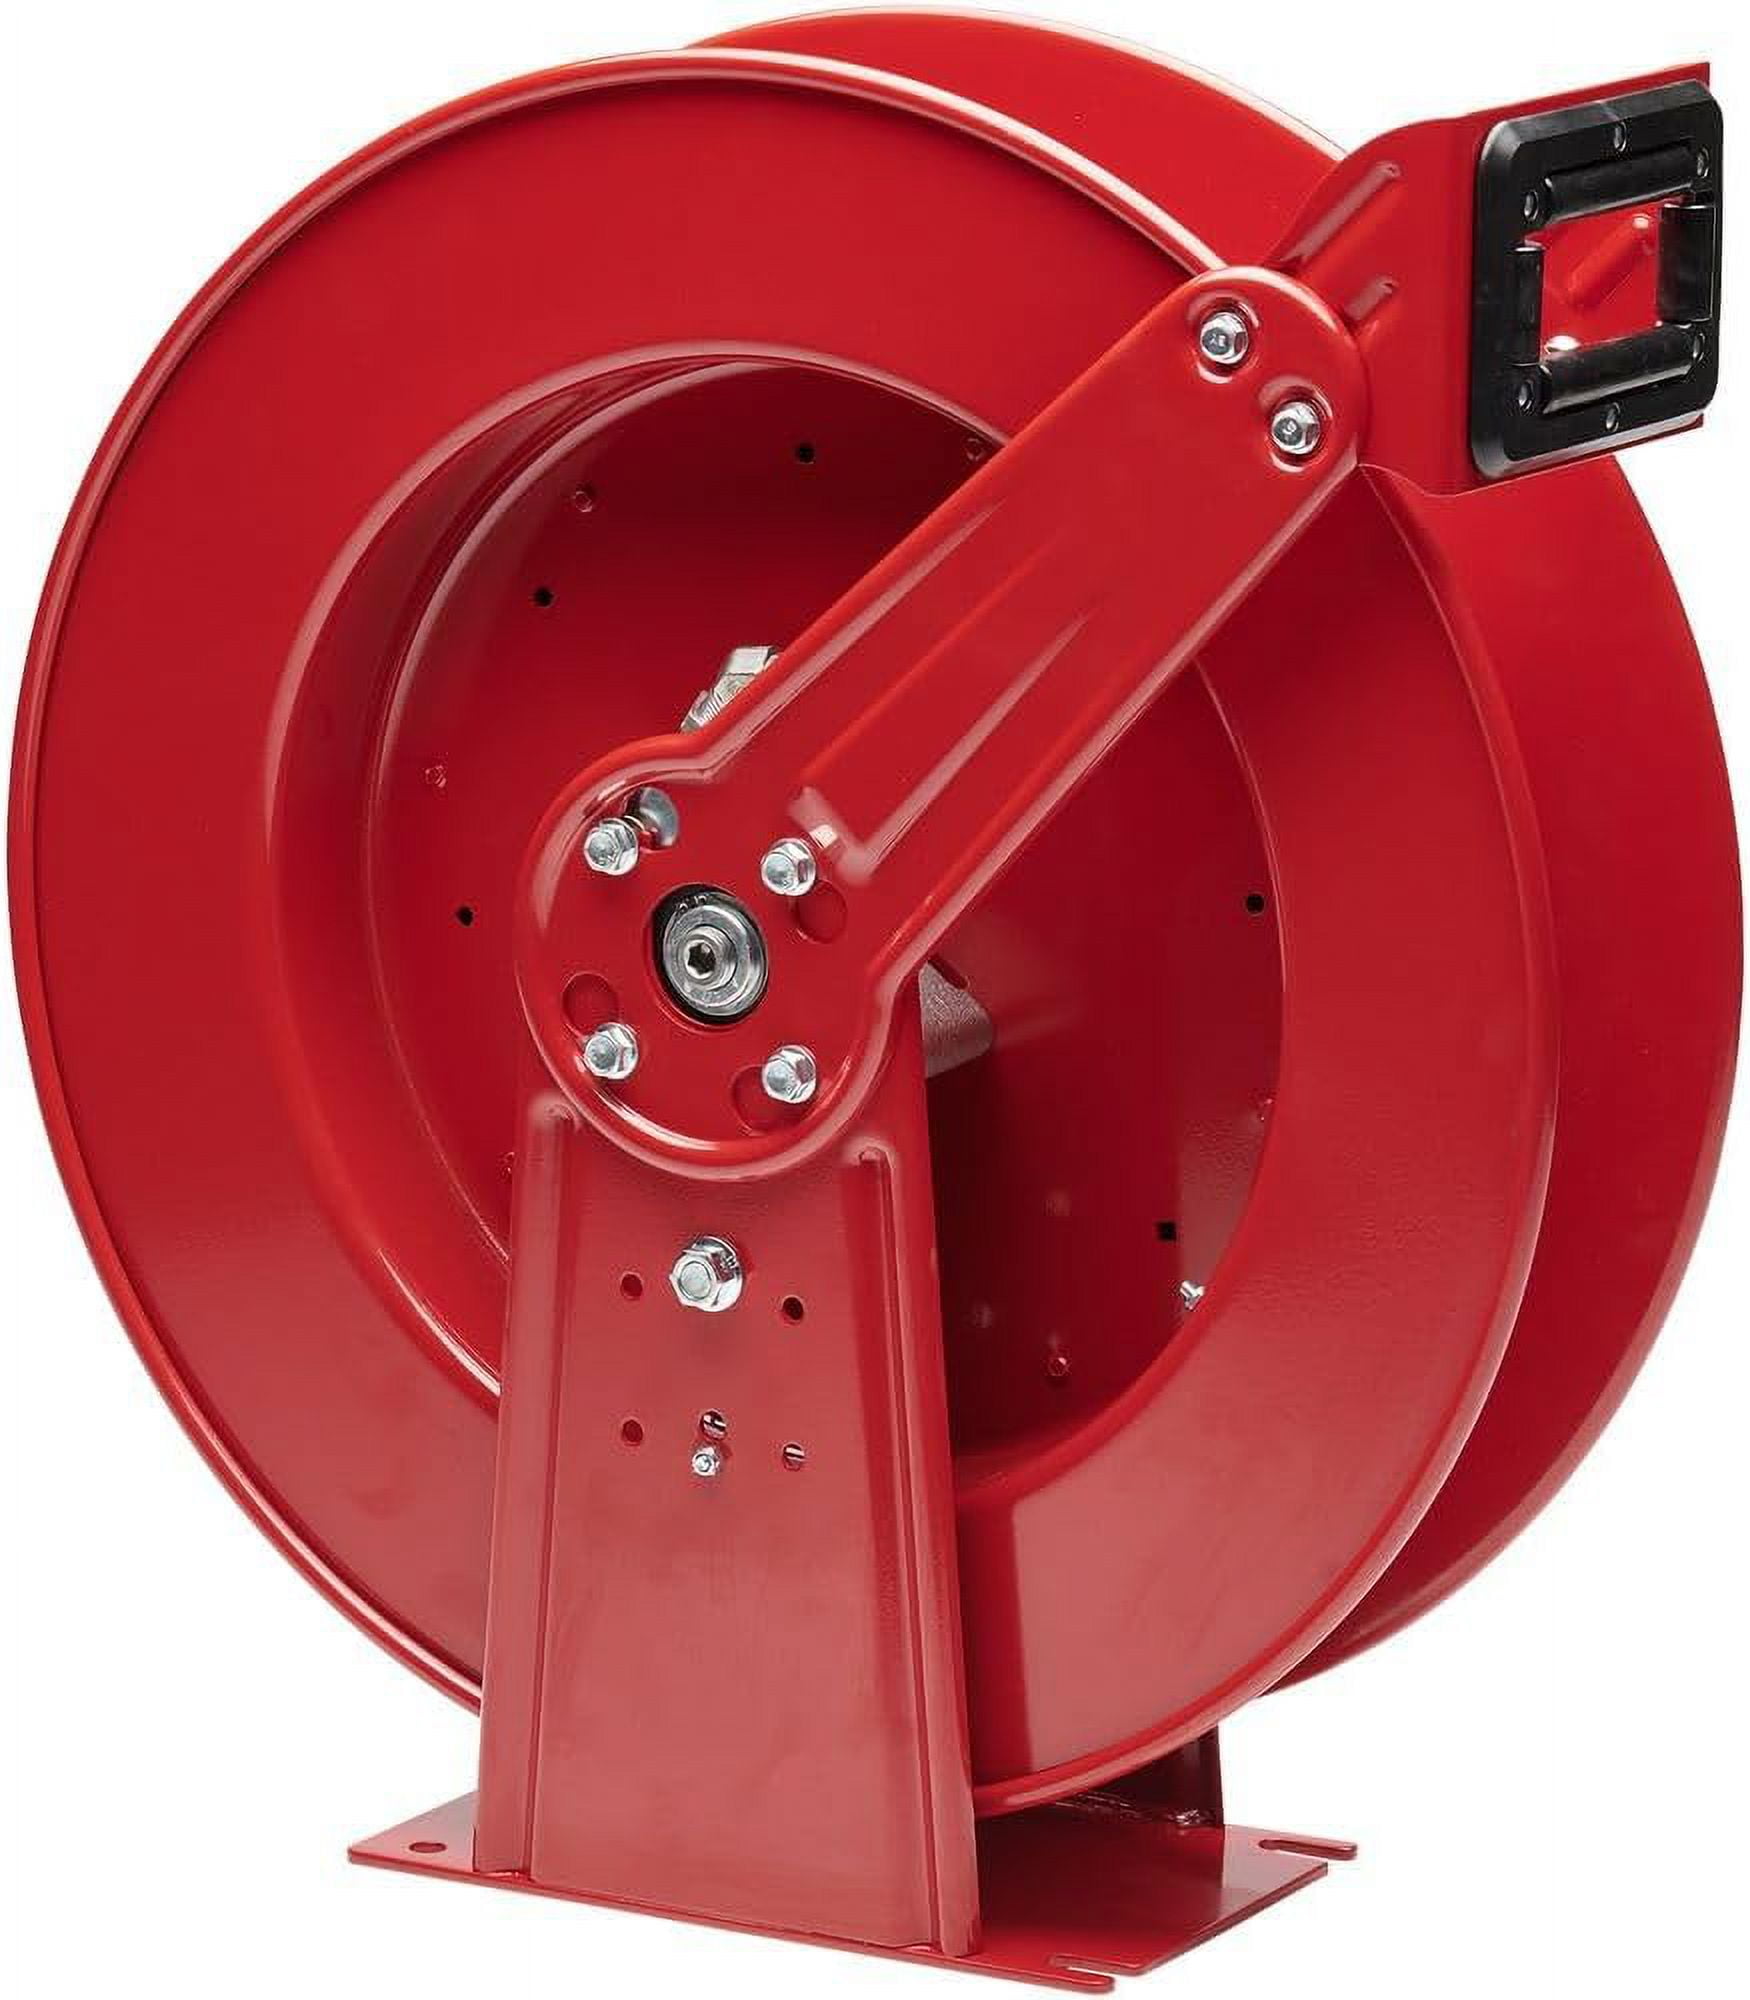 Reelcraft-PW81000 OHP 3/8 In. x 100 Ft. Spring Retractable Pressure Wash  Hose Reel Without Hose, Steel 